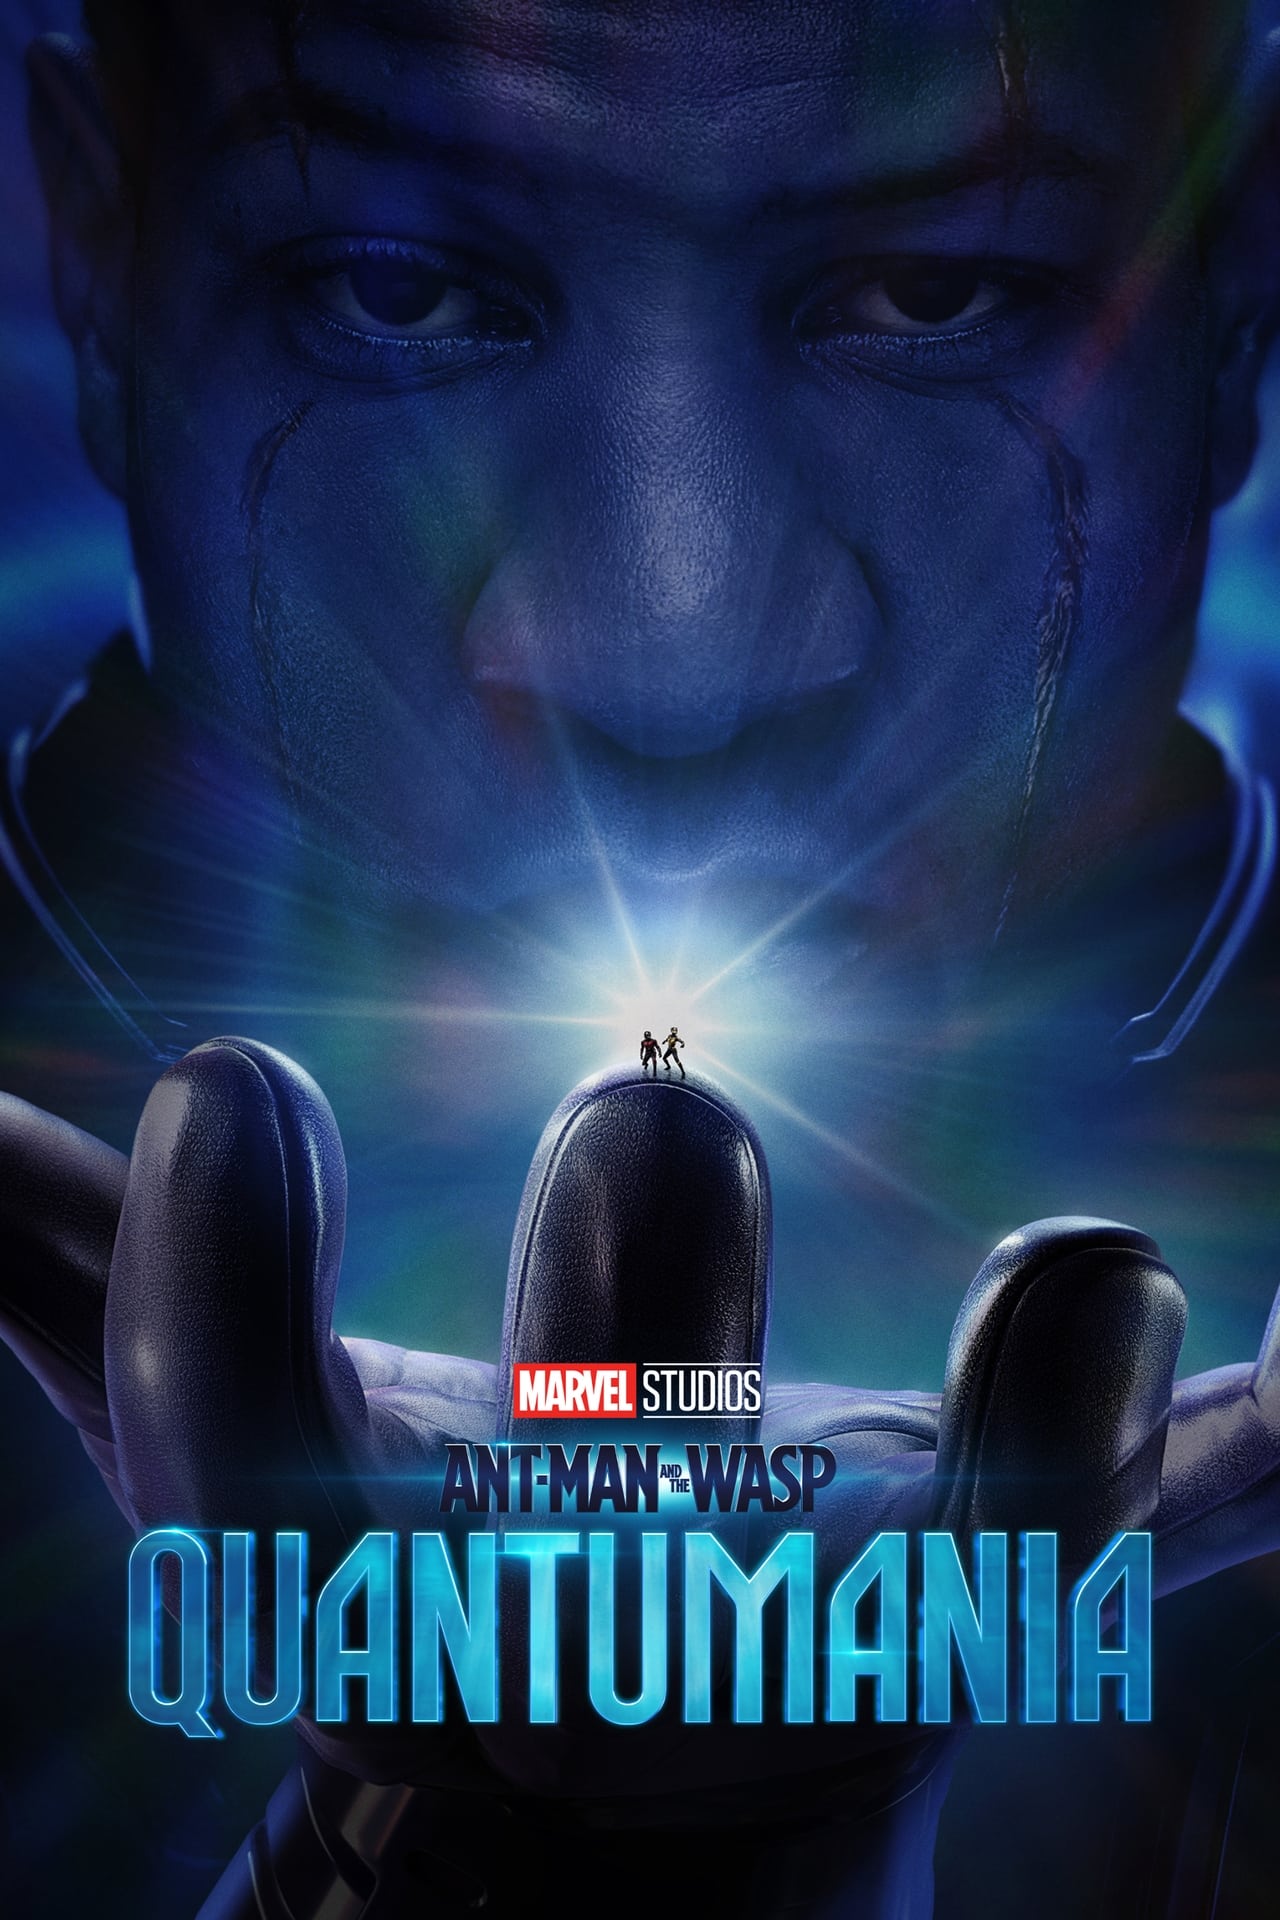 Ant-Man and the Wasp: Quantumania (2023) 256Kbps 23.976Fps 48Khz 5.1Ch Disney+ DD+ E-AC3 Turkish Audio TAC